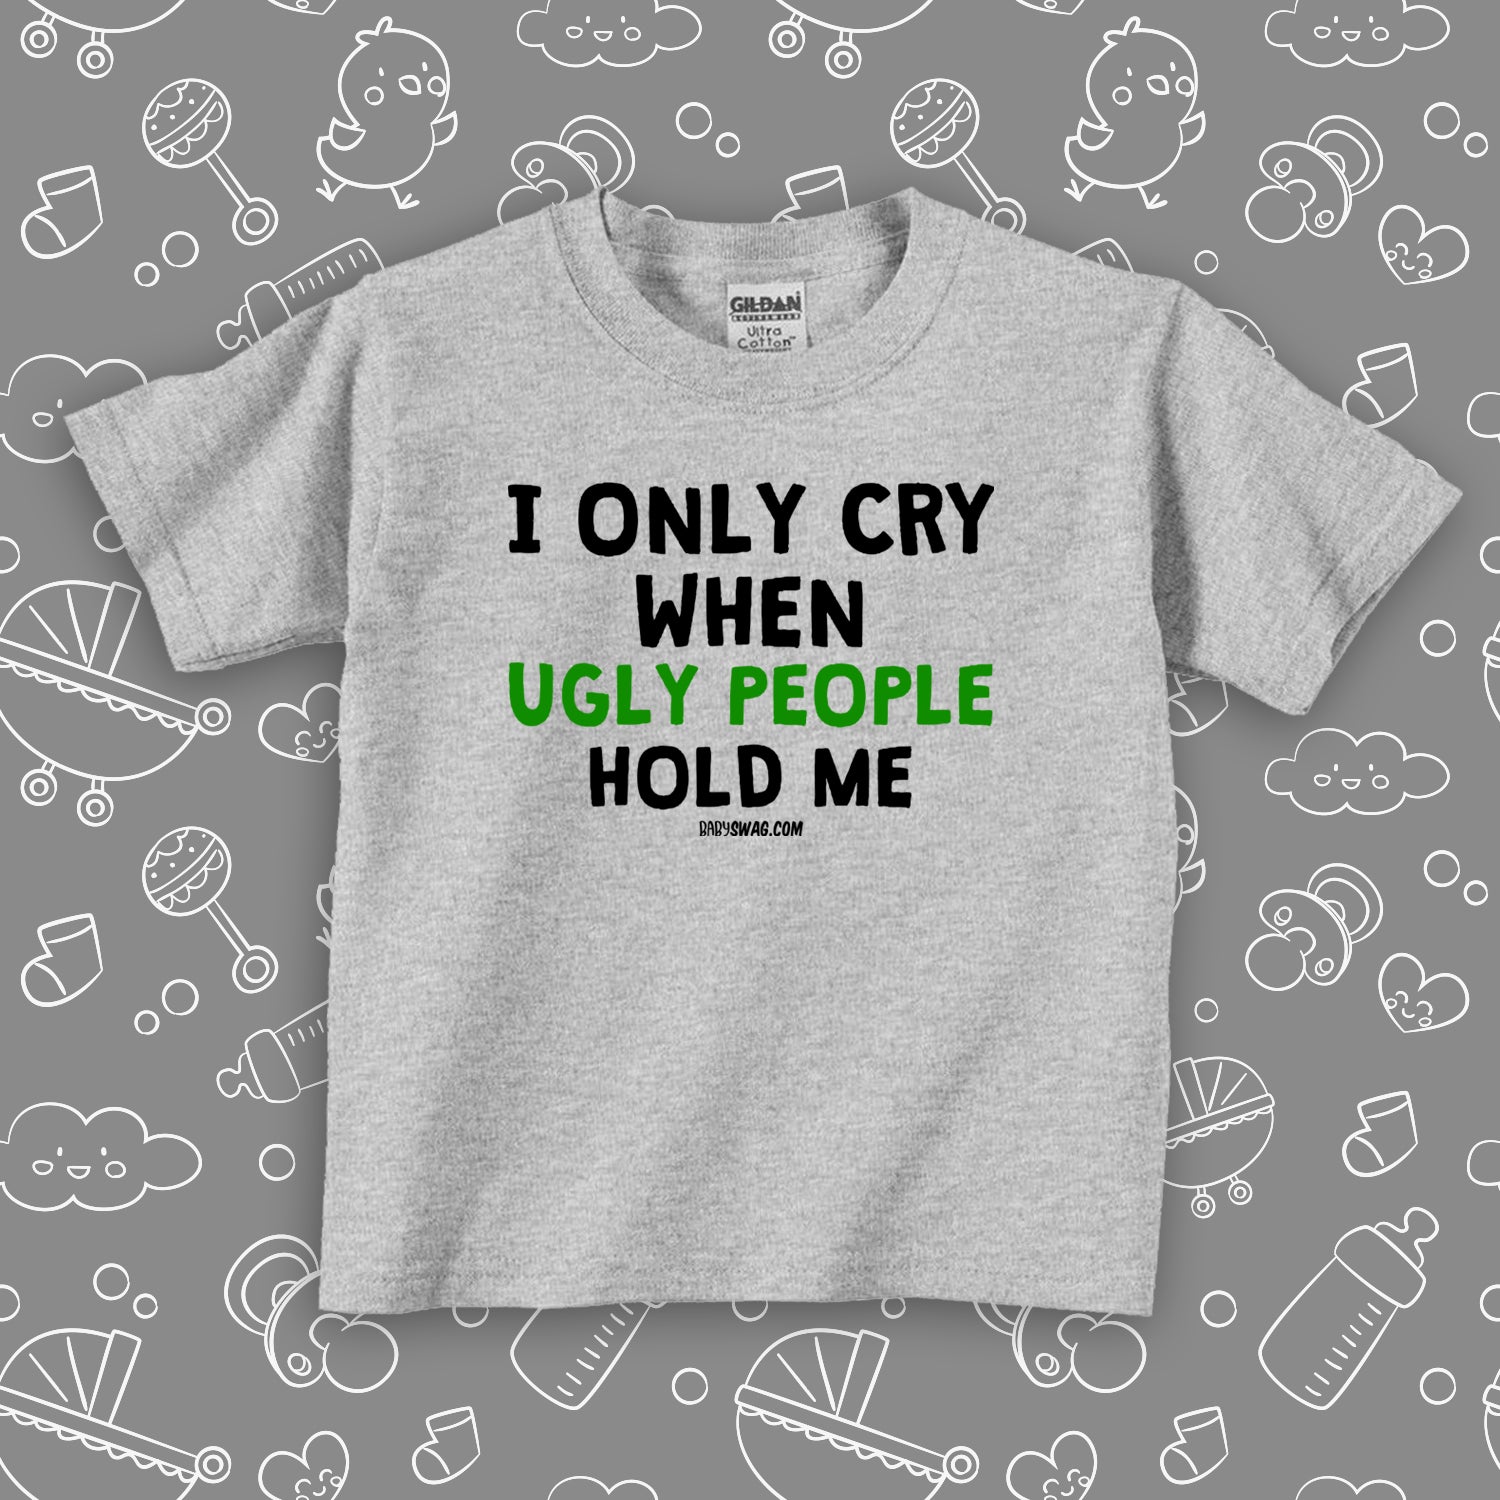 Toddler shirts with saying "I Only Cry When Ugly People Hold Me" in grey.